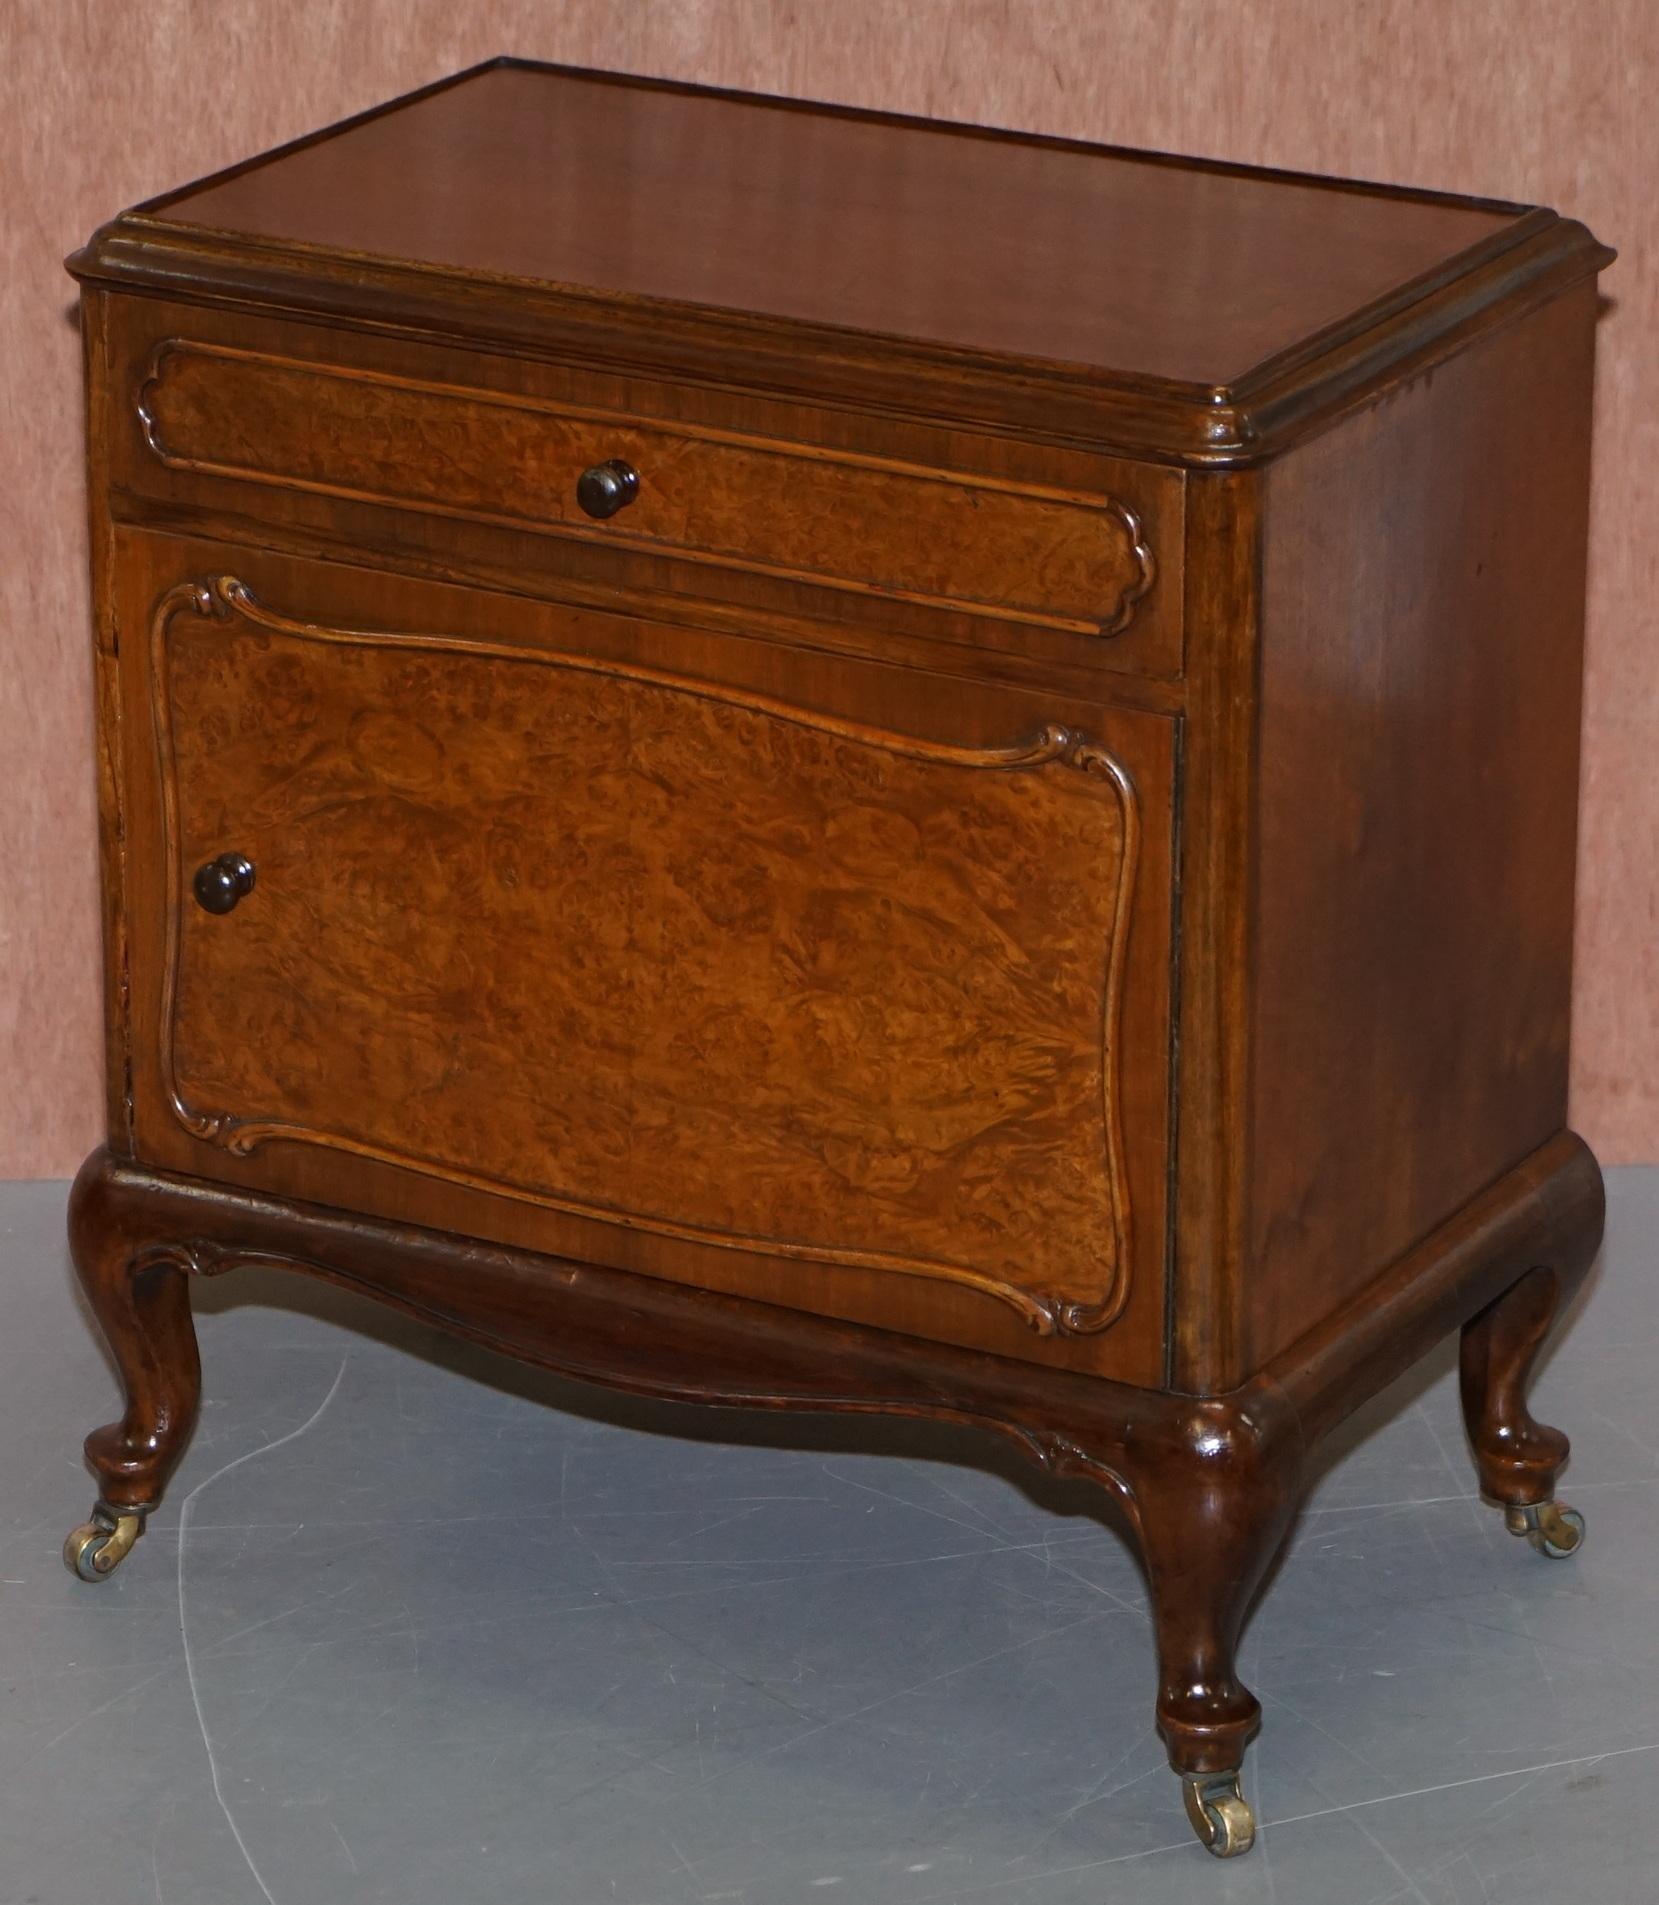 We are delighted to offer for sale this lovely original pair of circa 1920 burr walnut bedside table cupboards with original castors

A very good looking and well made pair, the timber patina is sublime and heavily burred especially to the front